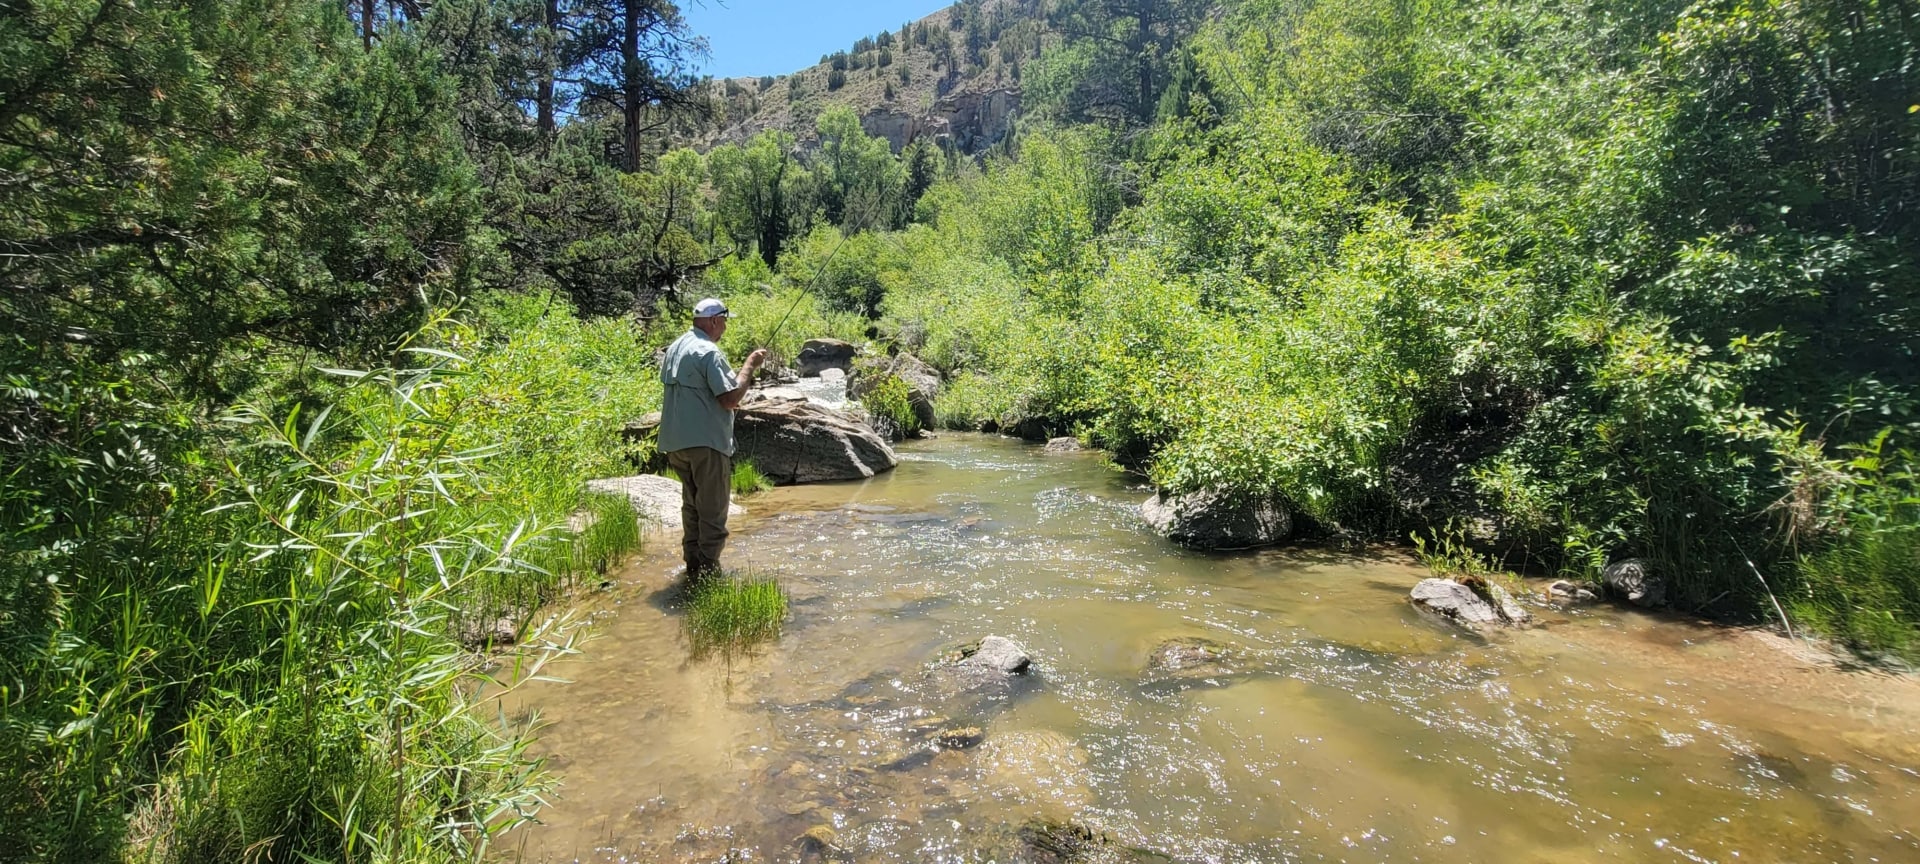 fly fishing property for sale wyoming thieves den ranch